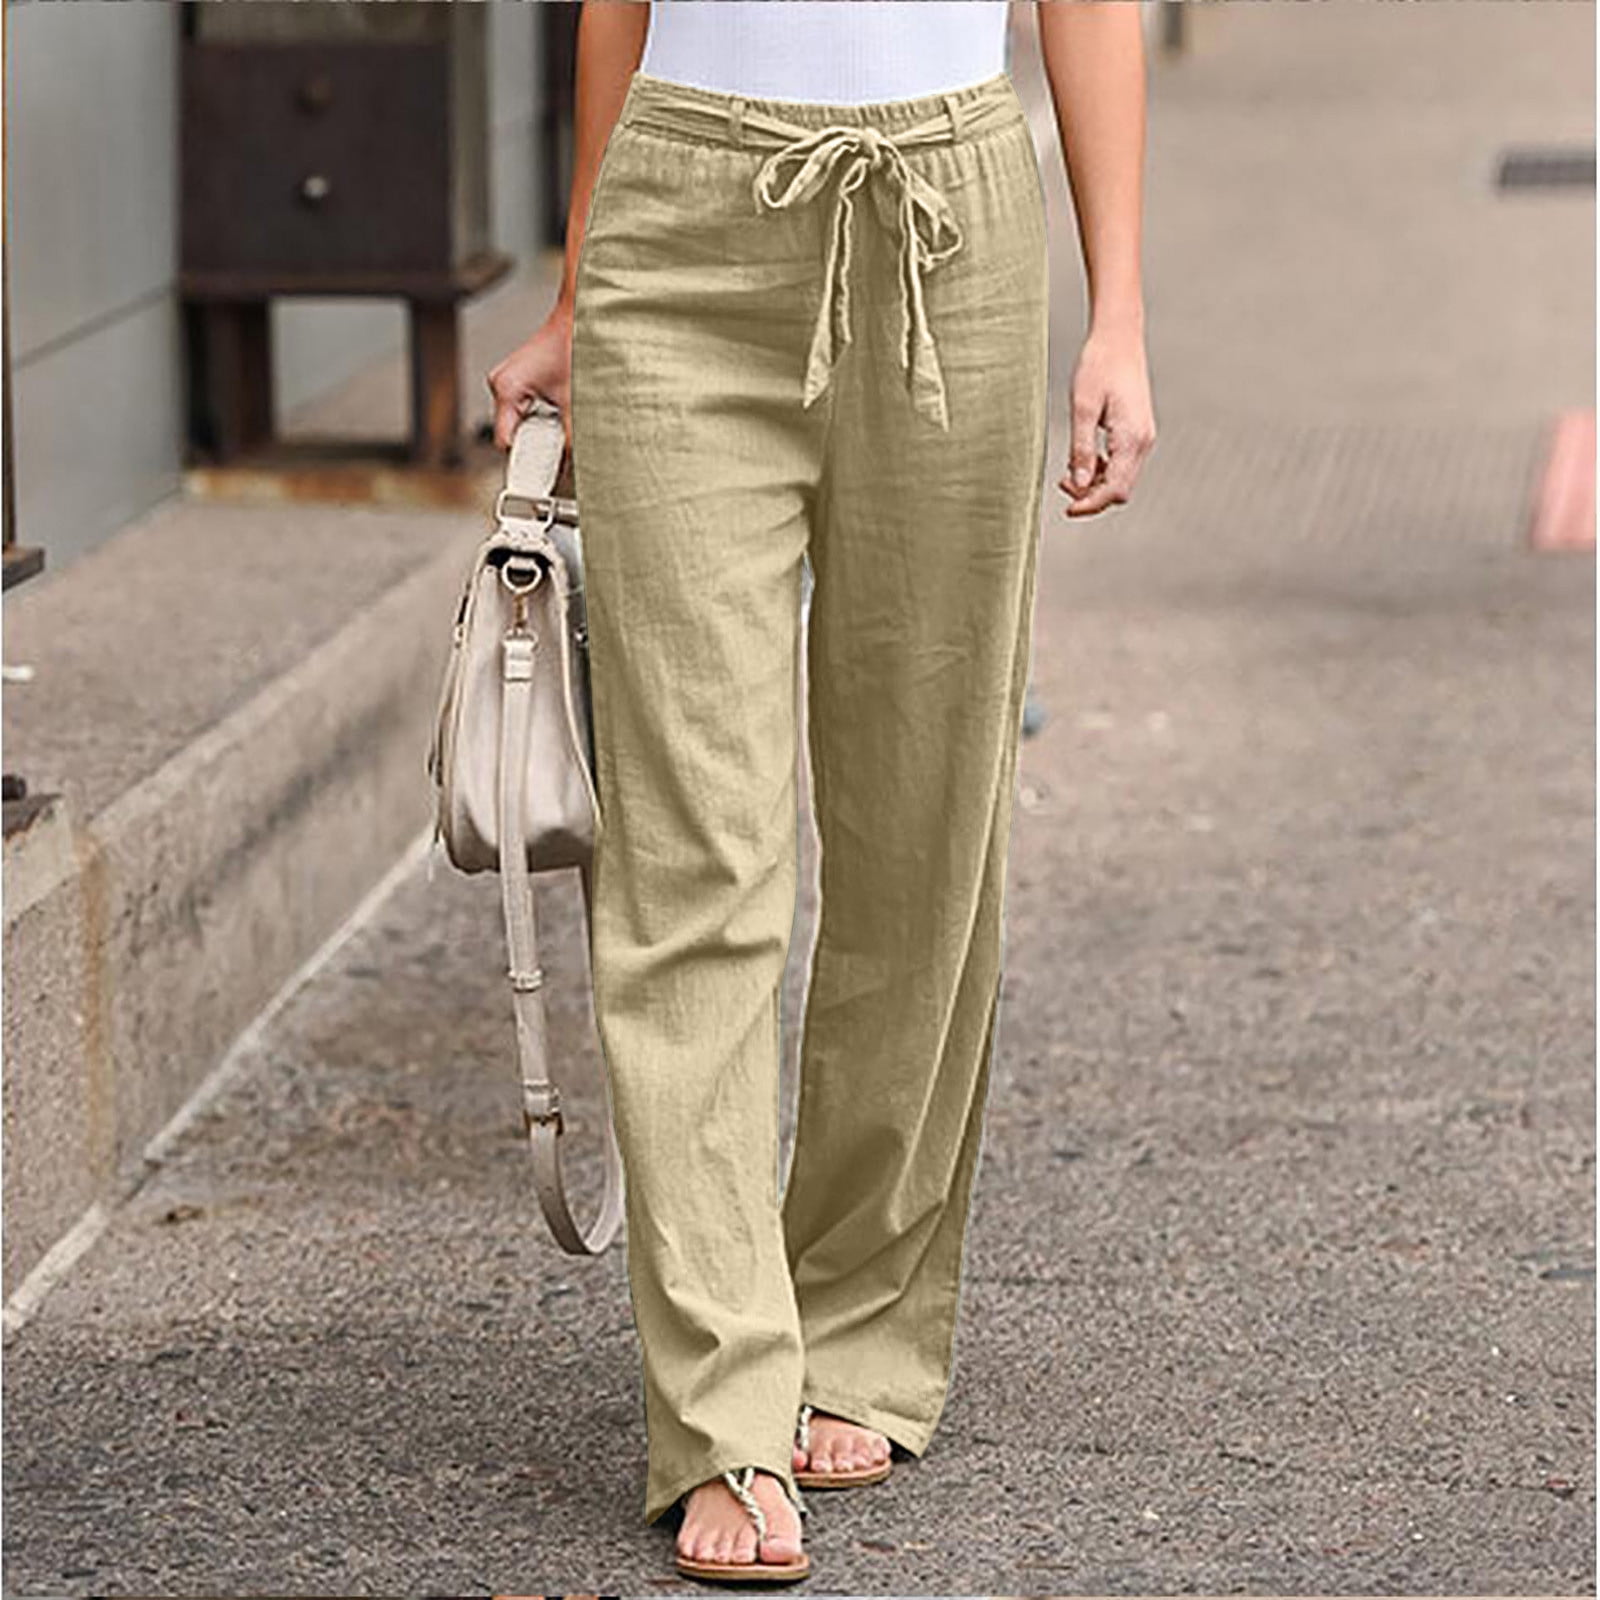 7 Pairs of SummerFriendly Lightweight Pants Inspired by Celebs